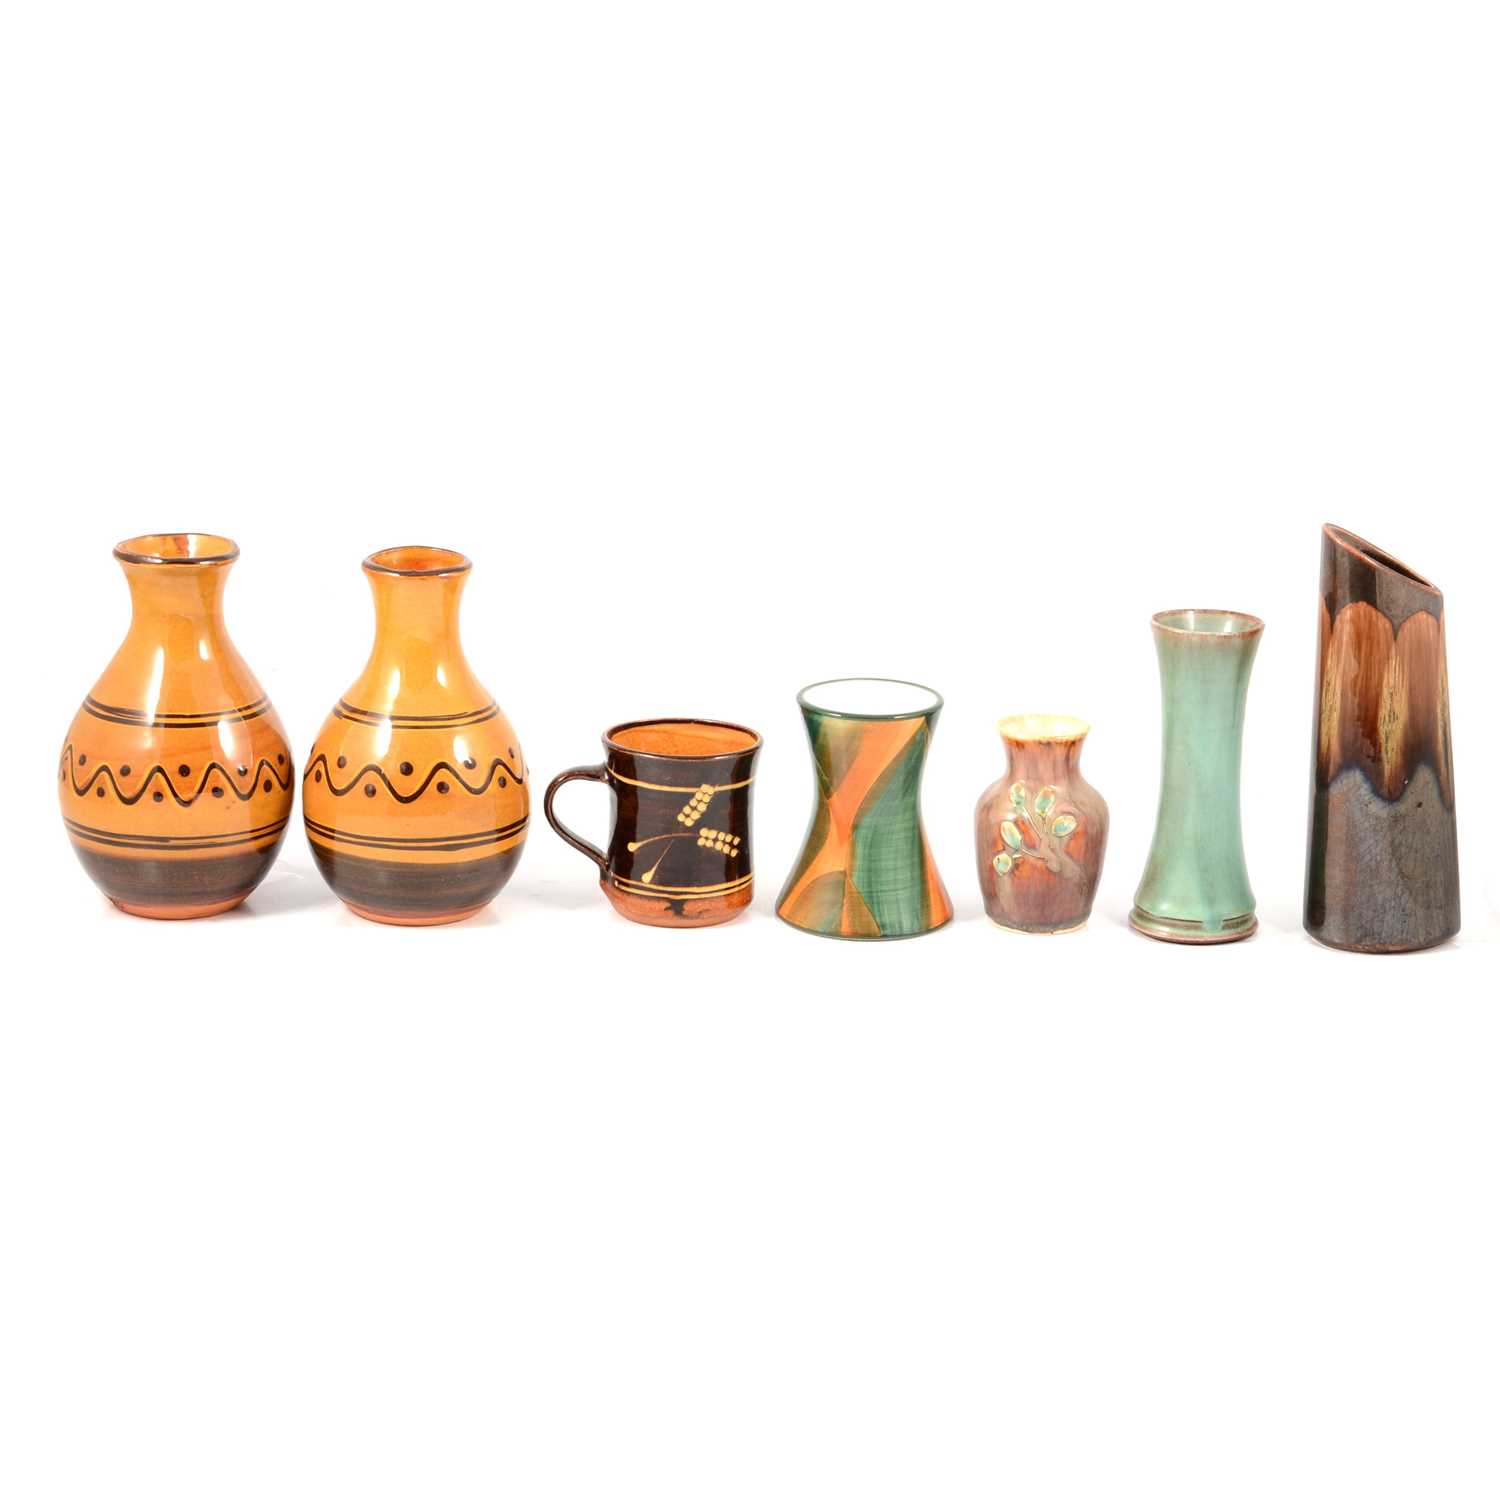 Lot 121 - Coldstone Kiln Pottery and other studio pottery items.